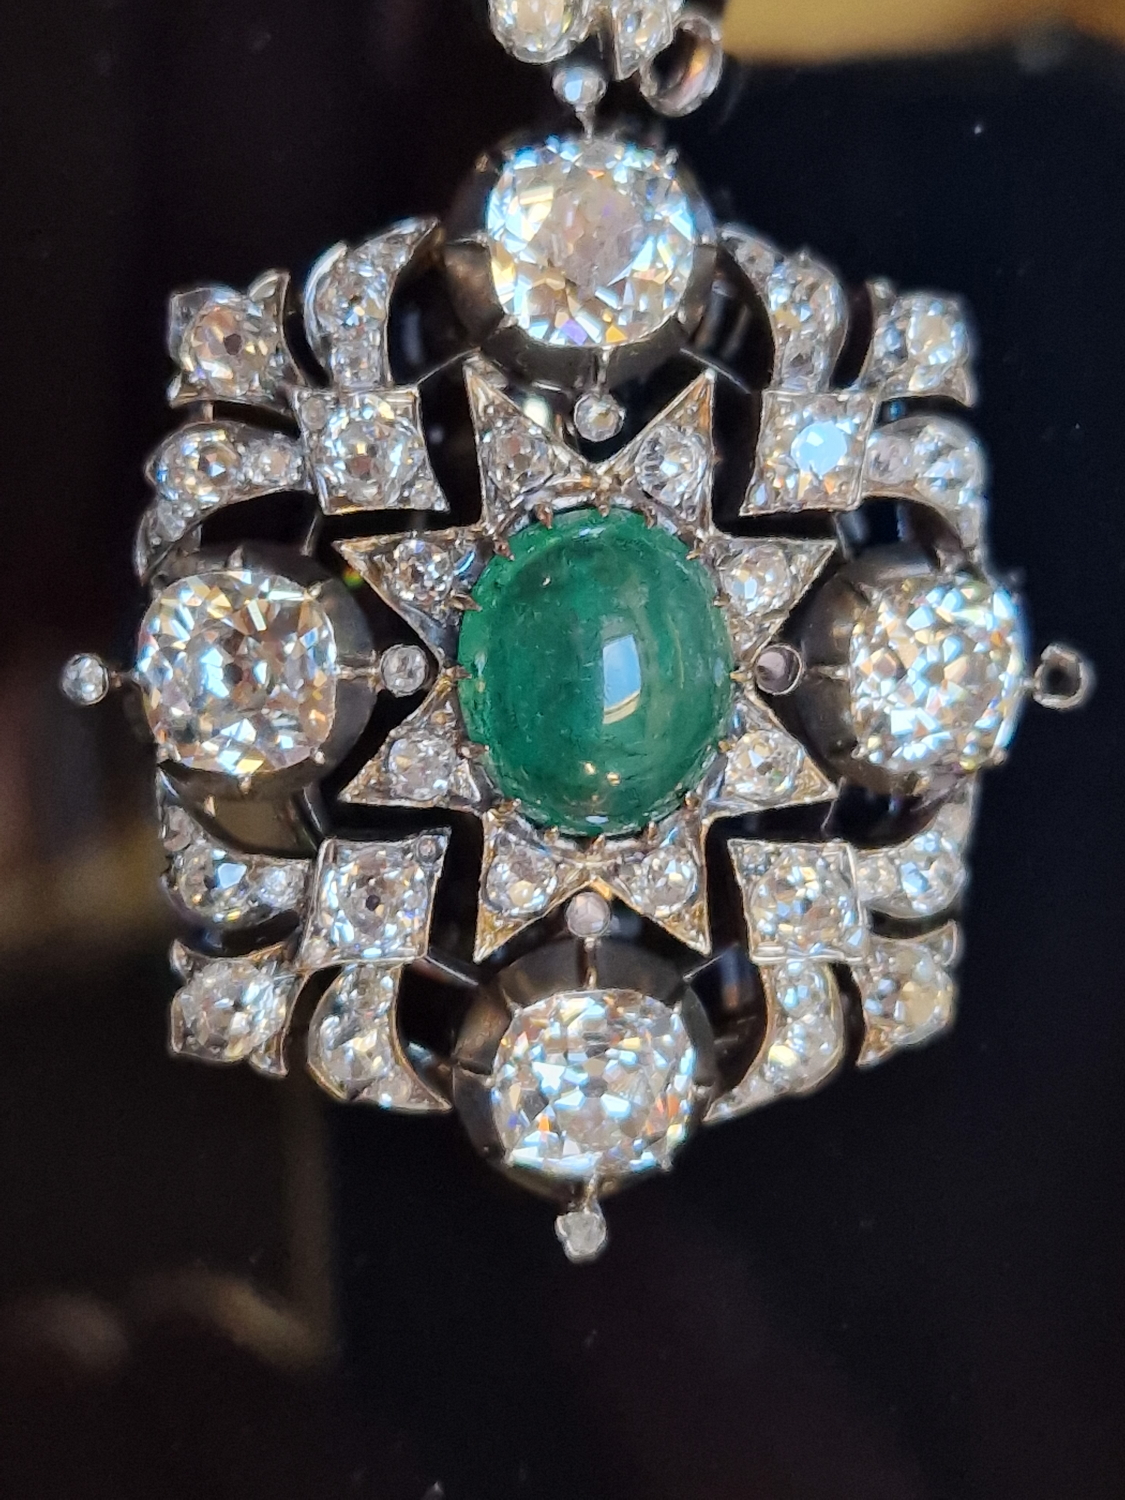 AN ANTIQUE OLD CUT DIAMOND AND EMERALD PENDANT BROOCH. THE PENDANT CENTRED WITH AN OVAL CABOCHON - Image 8 of 9